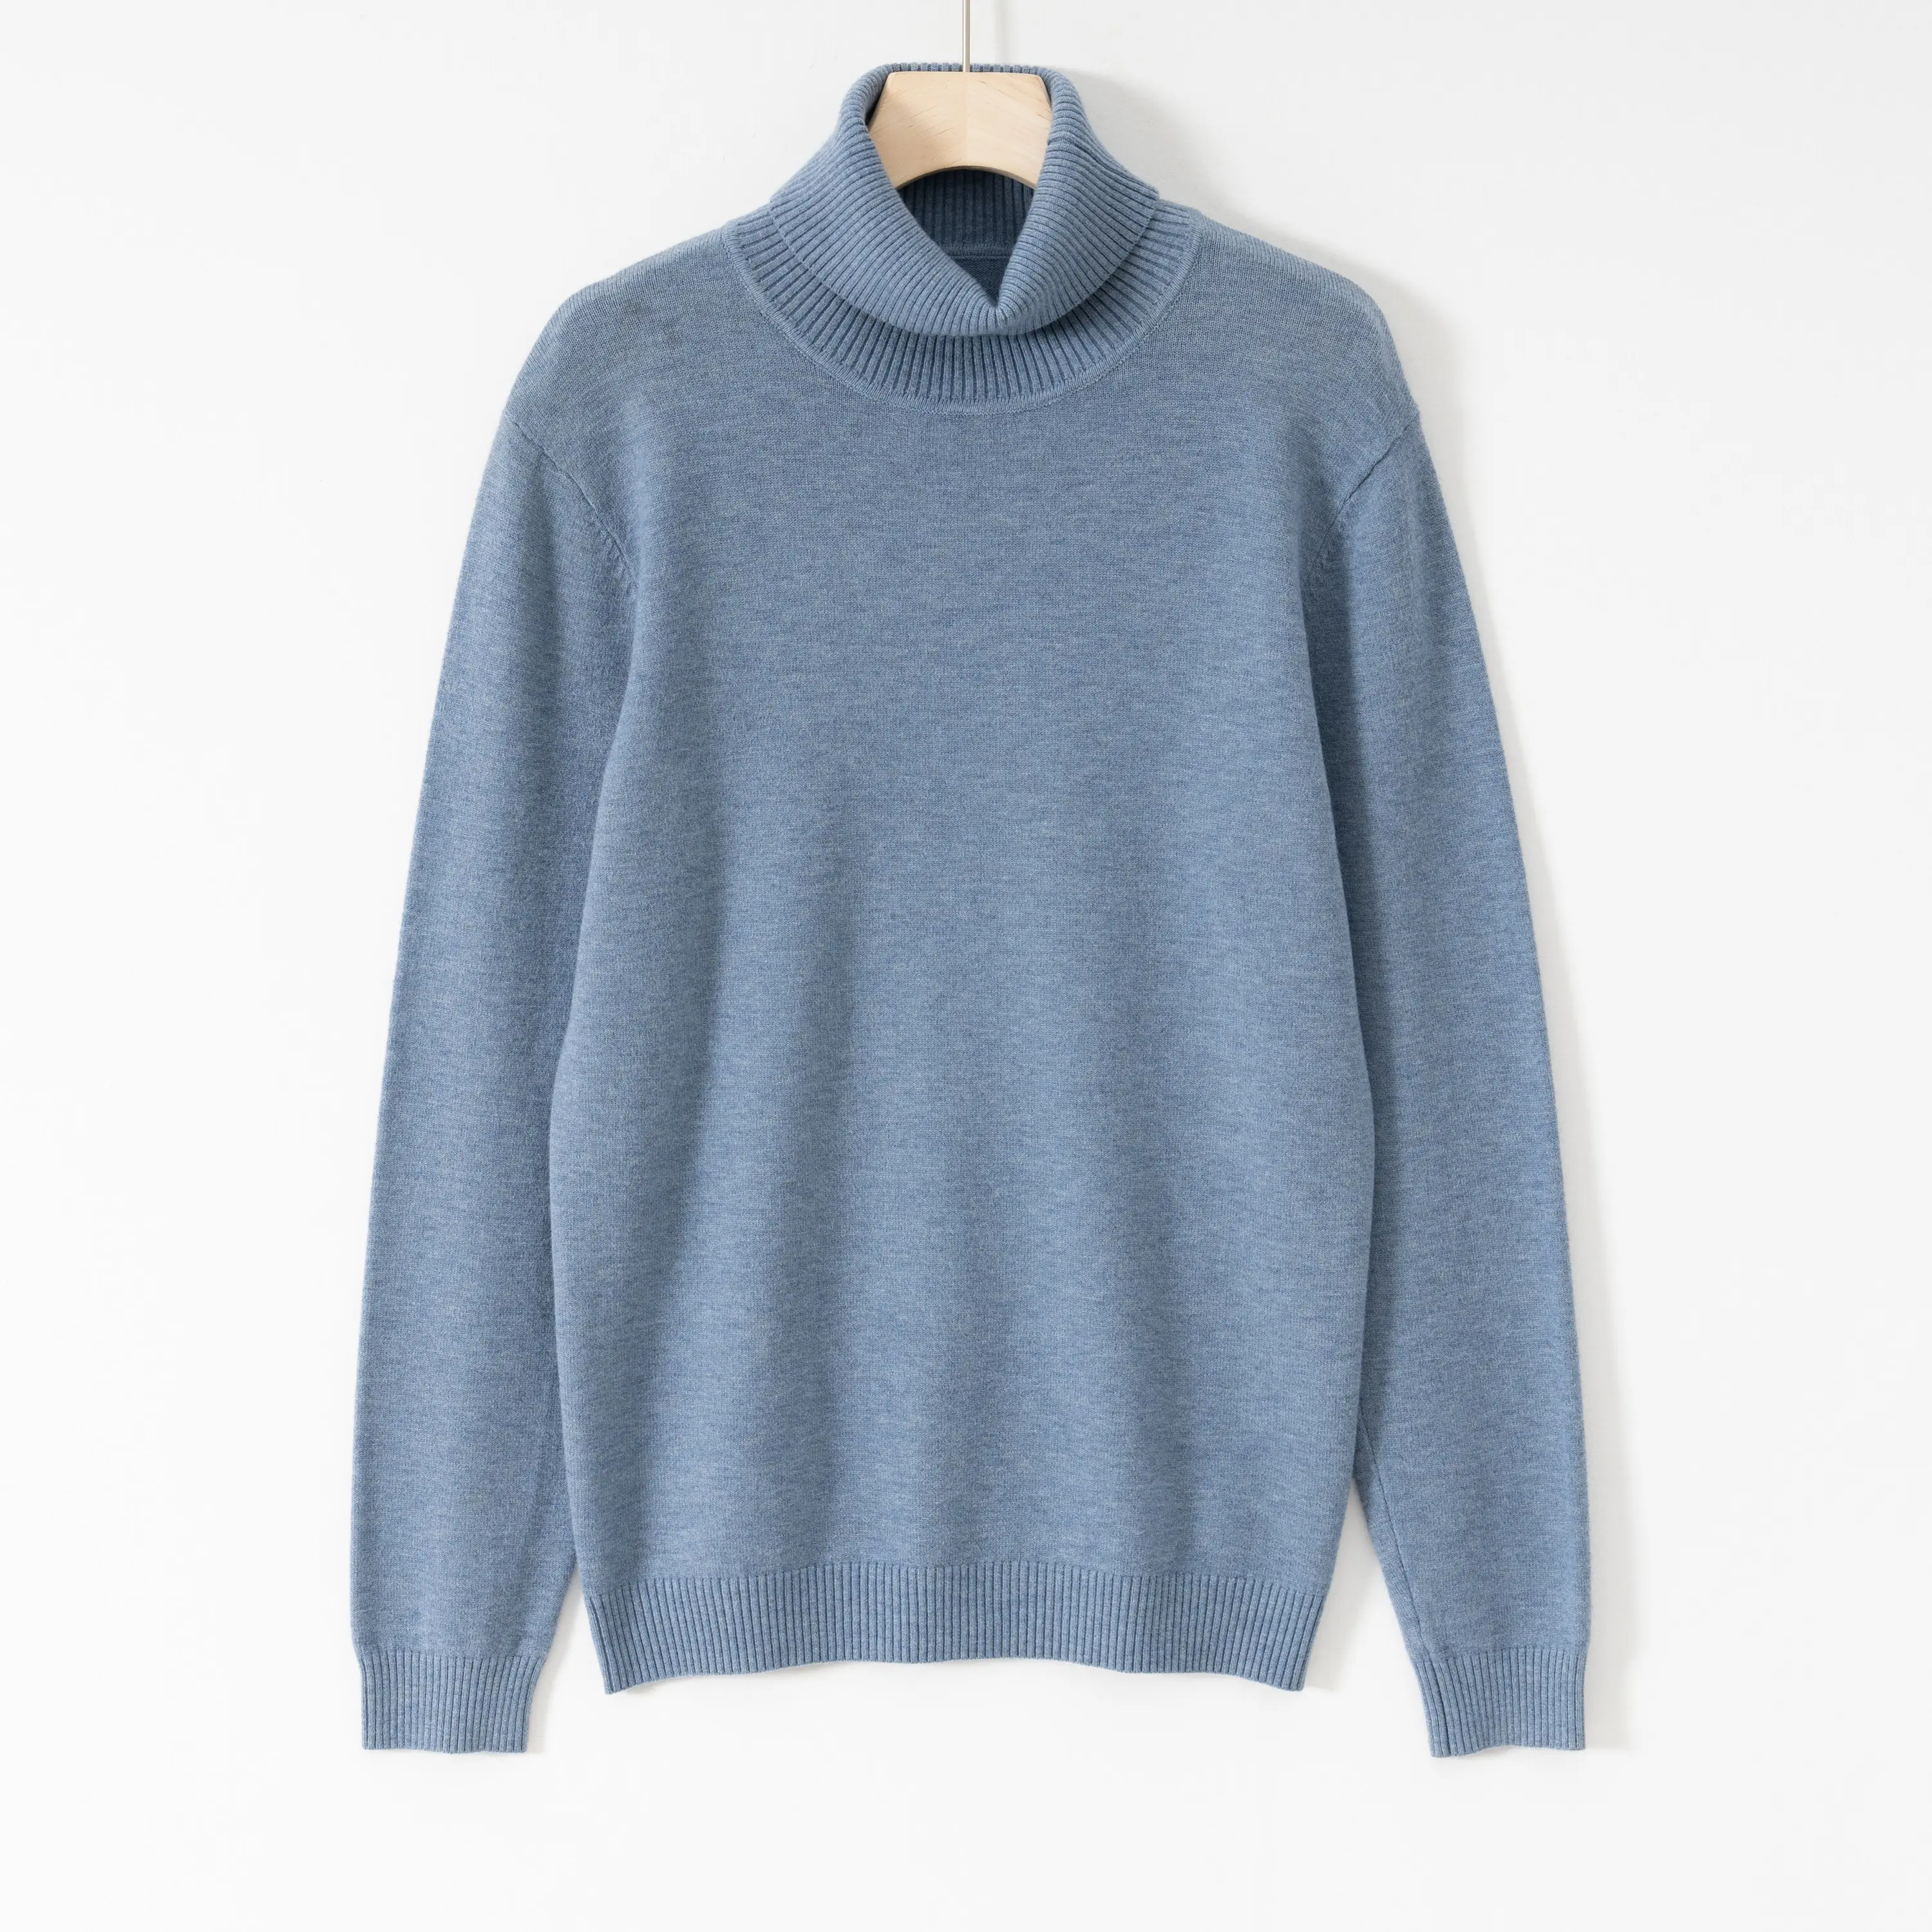 Pullover High Collar Pullover Knitwear Winter Autumn Knitted Men's Sweaters